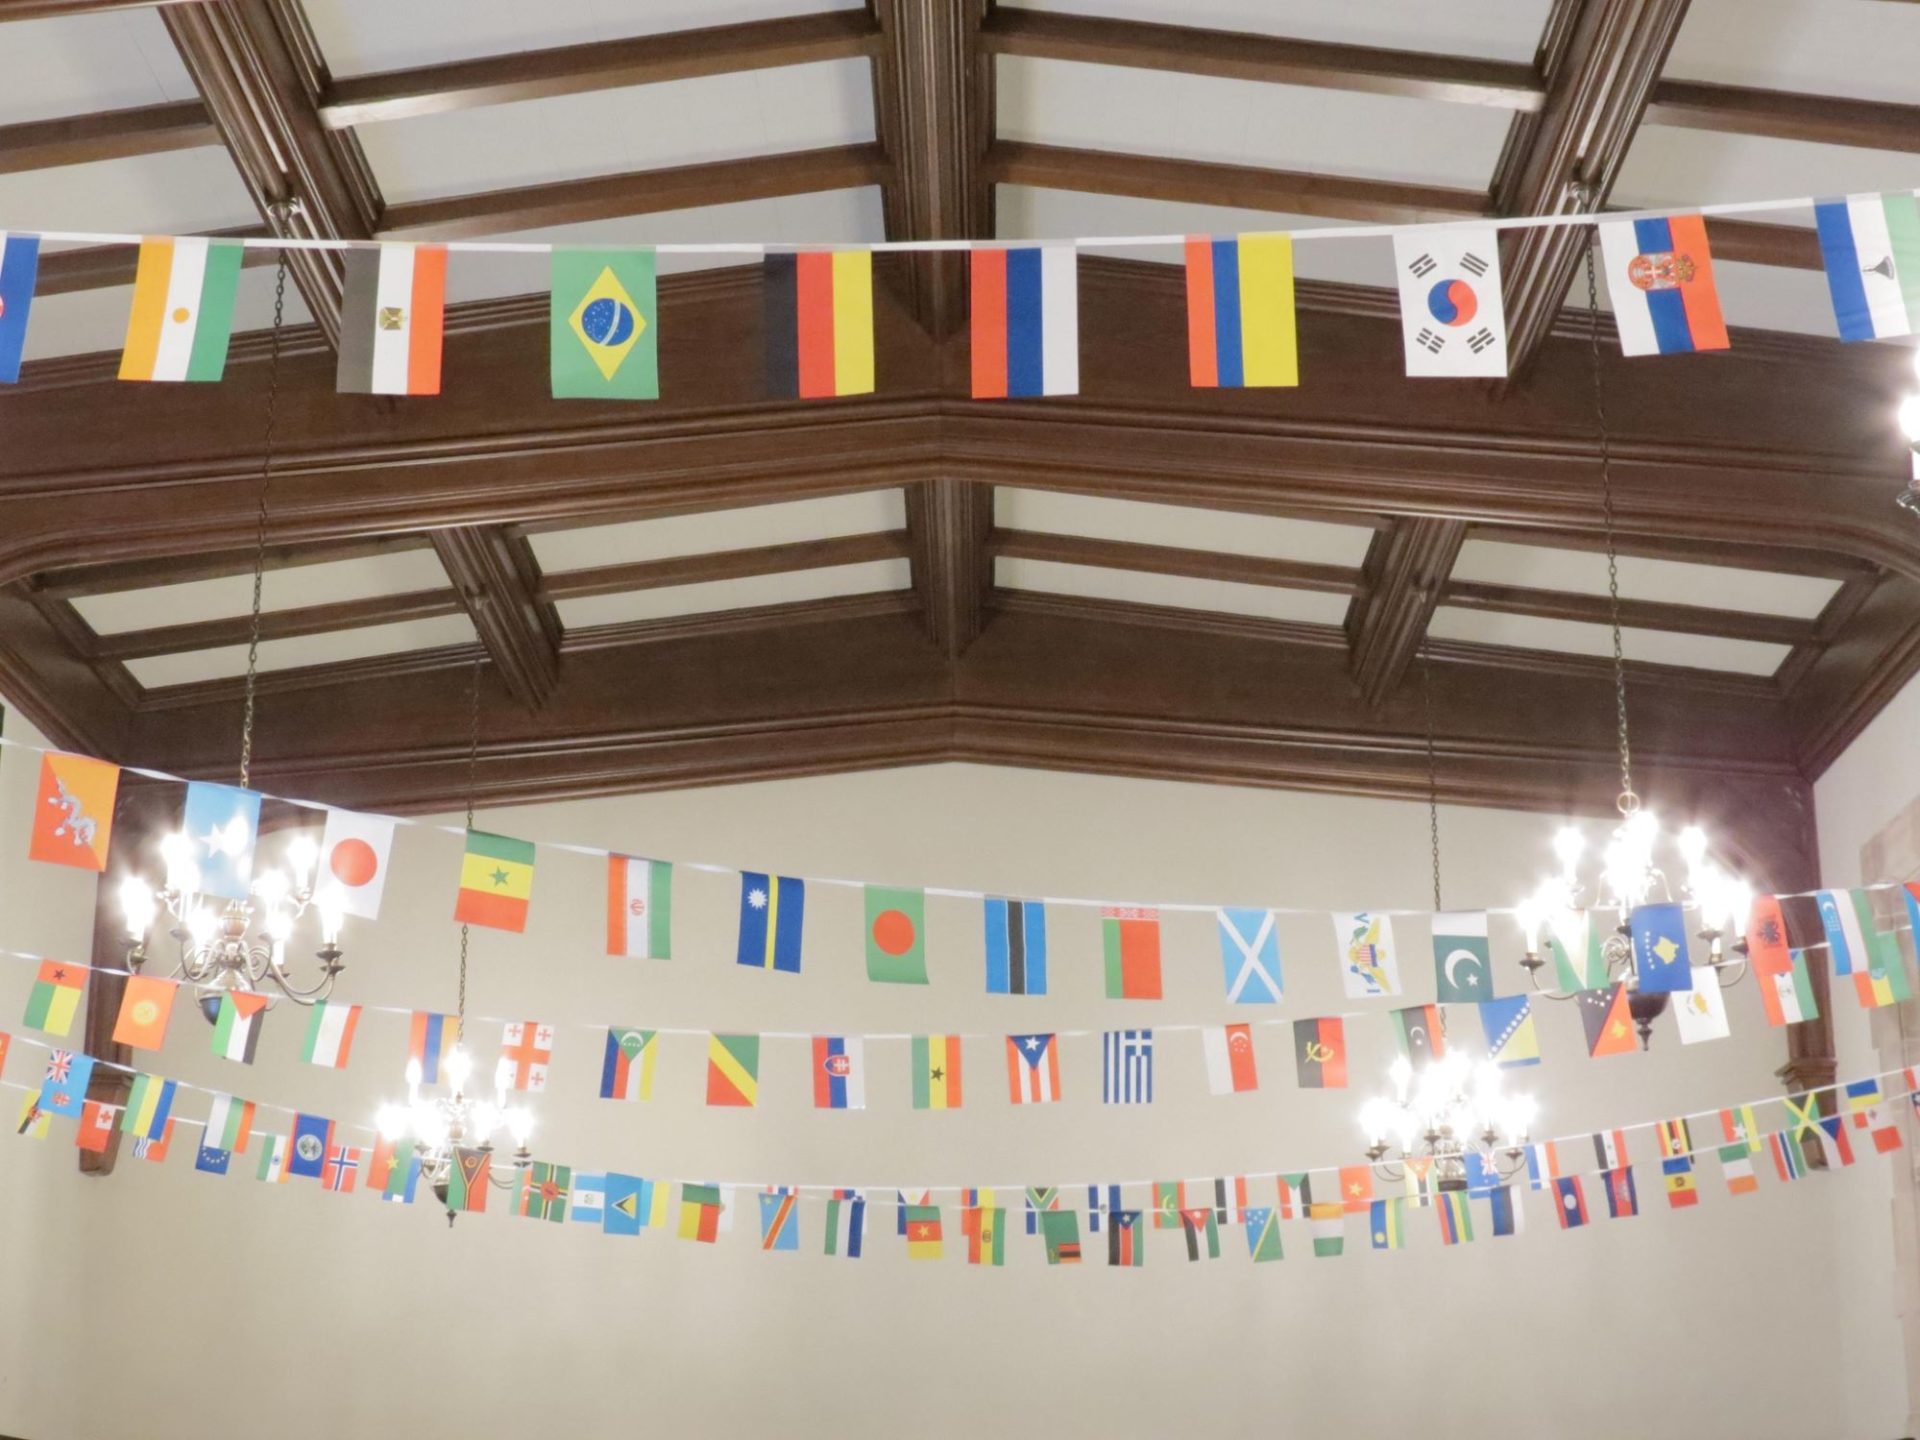 Strings of small flags from different countries stretch across the ceiling of a large room.